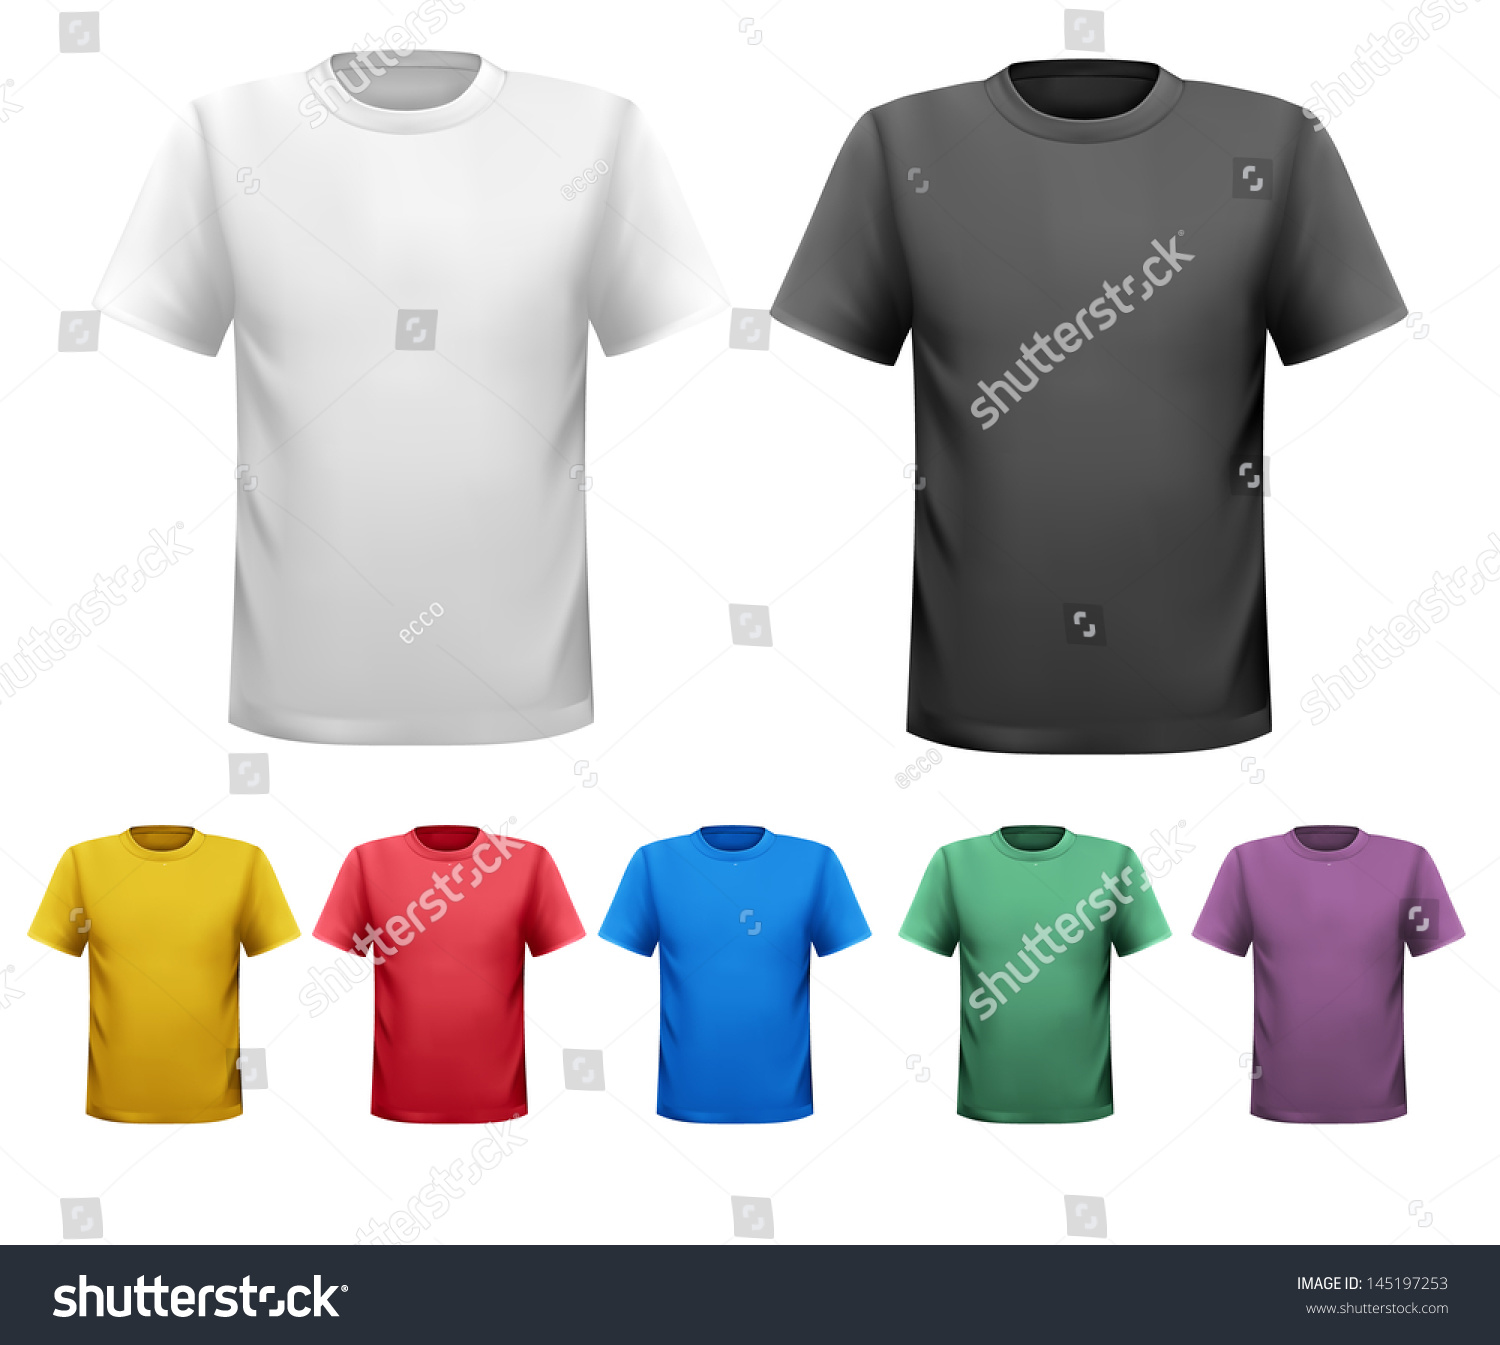 Black And White And Color Men T-Shirts. Design Template. Raster Version ...